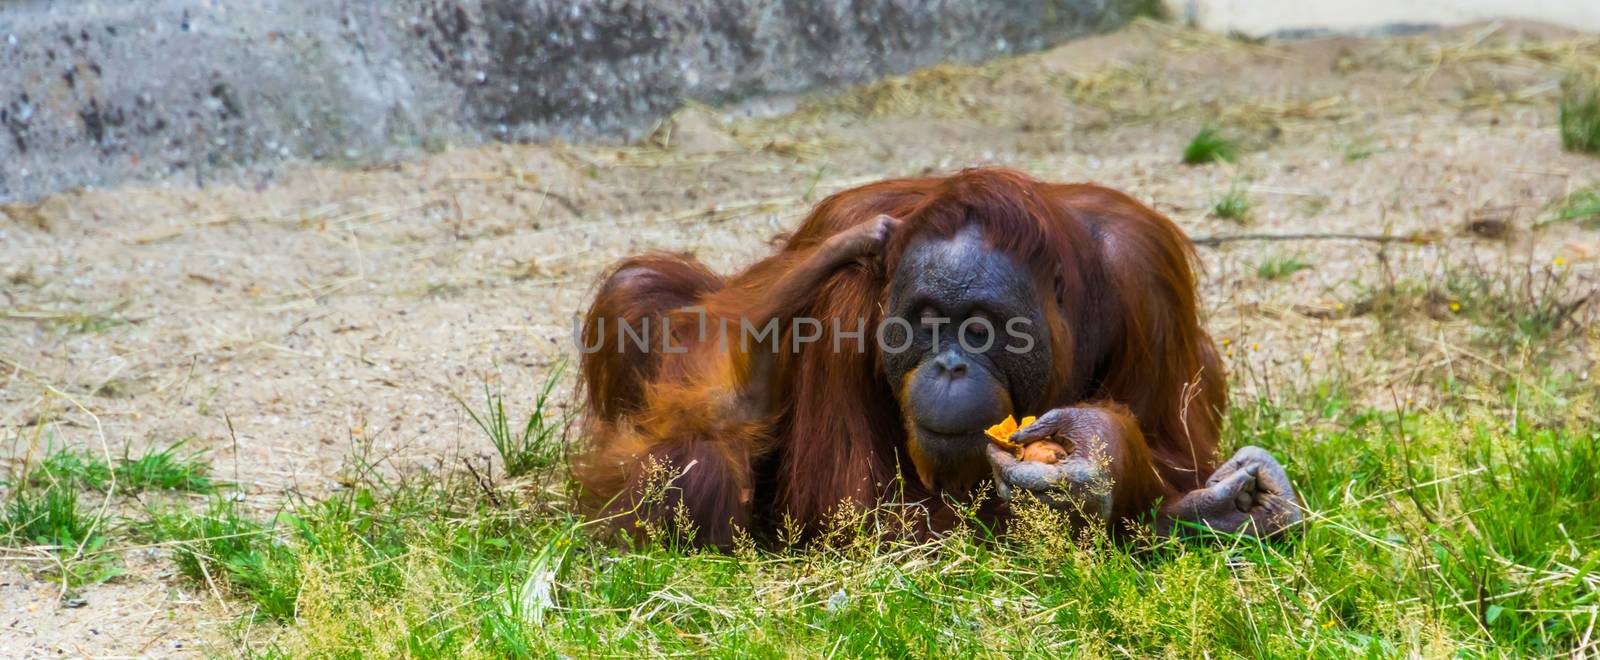 Mother bornean orangutan eating with her infant together, critically endangered animal specie from Indonesia